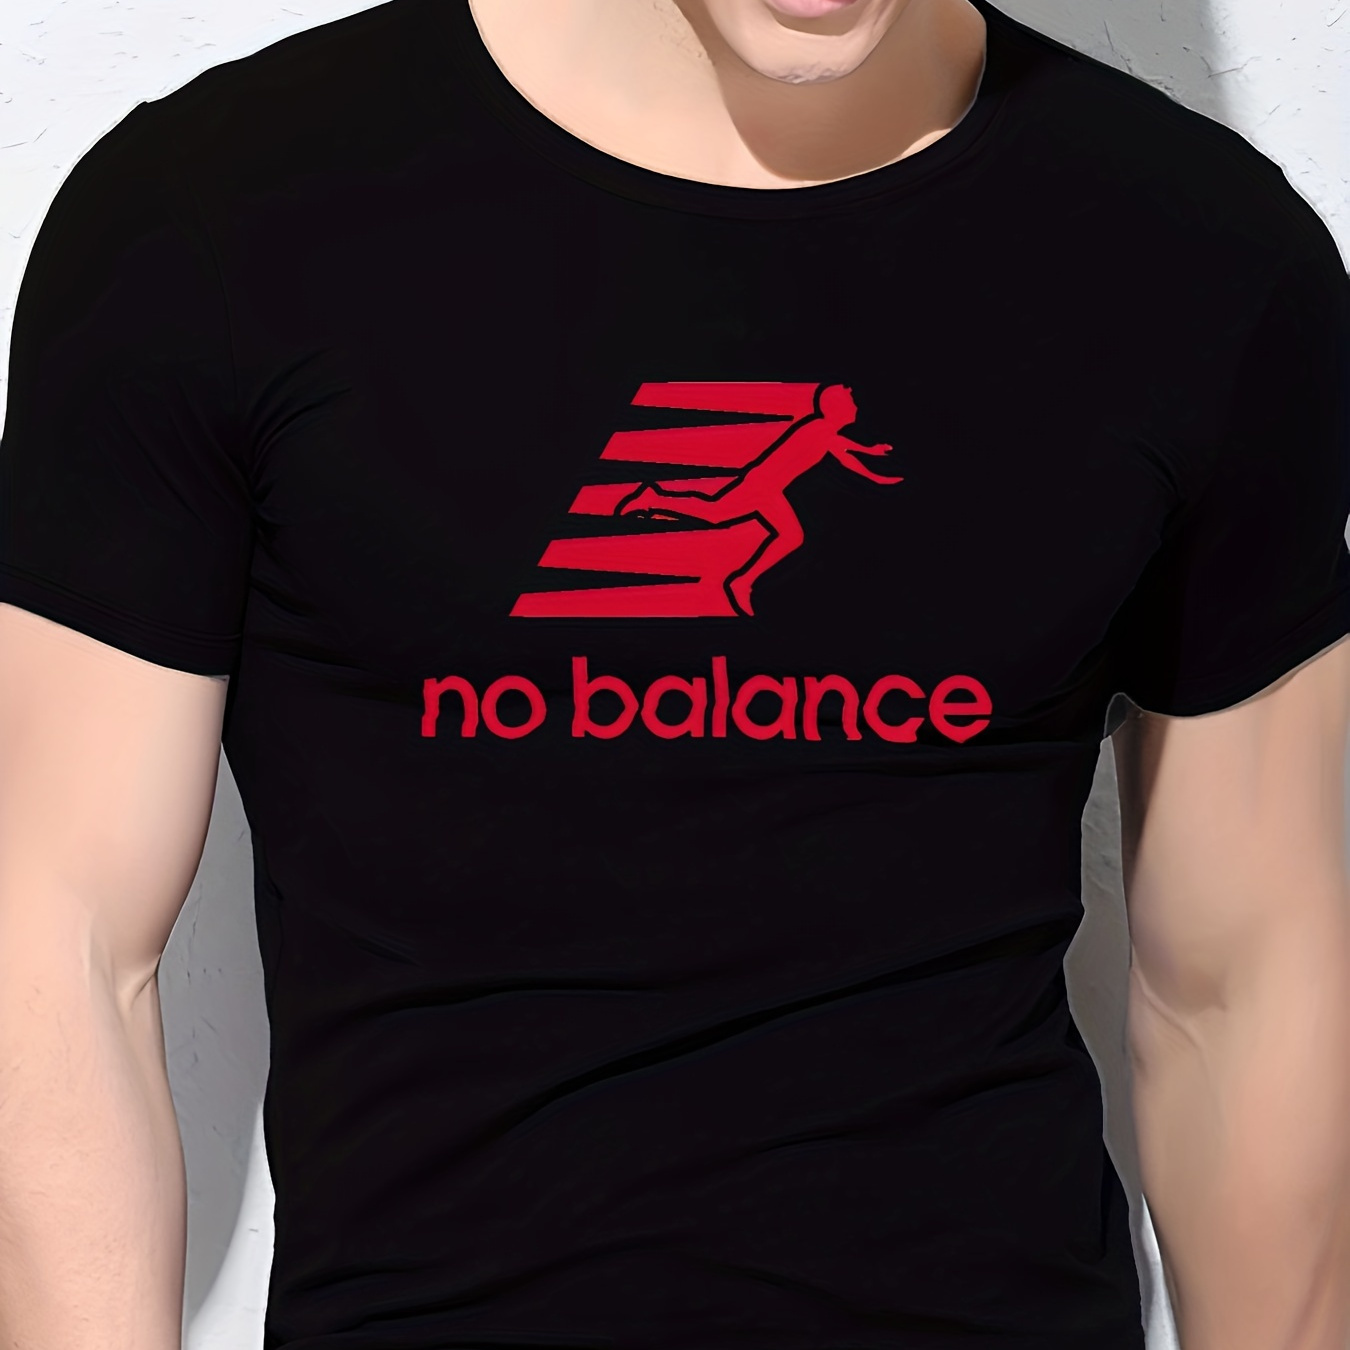 

No Balance Letter Funny Pattern Print Men's Crew Neck Short Sleeve T-shirt, Trendy Tees, Casual Comfortable Lightweight Top For Summer, Outdoor Sports